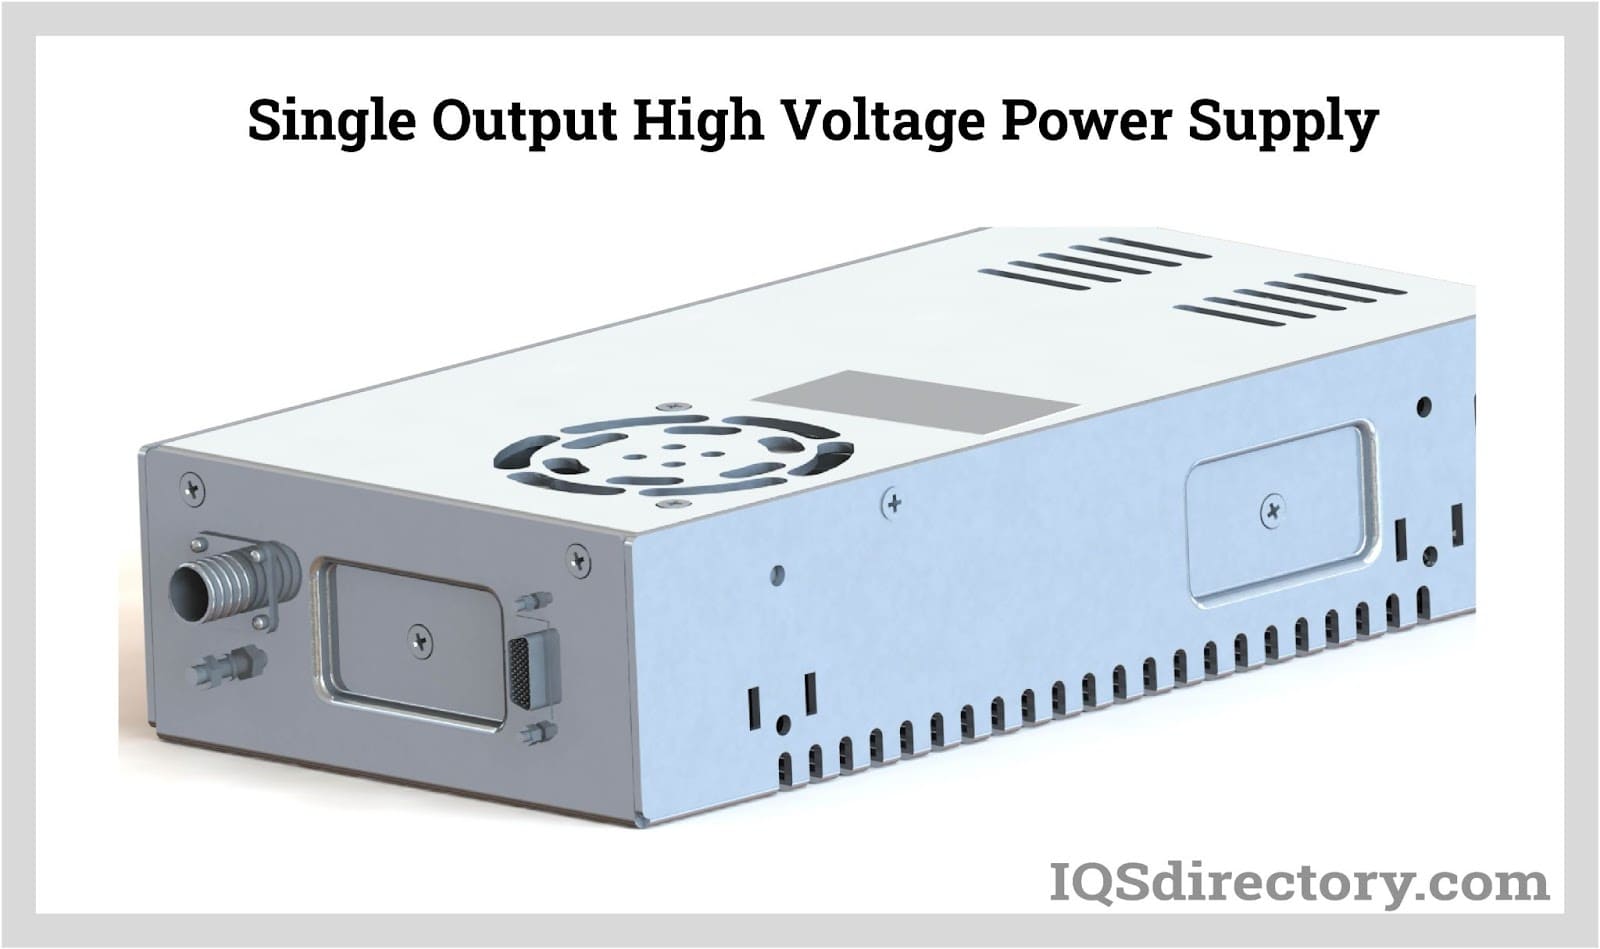 Single Output High Voltage Power Supply